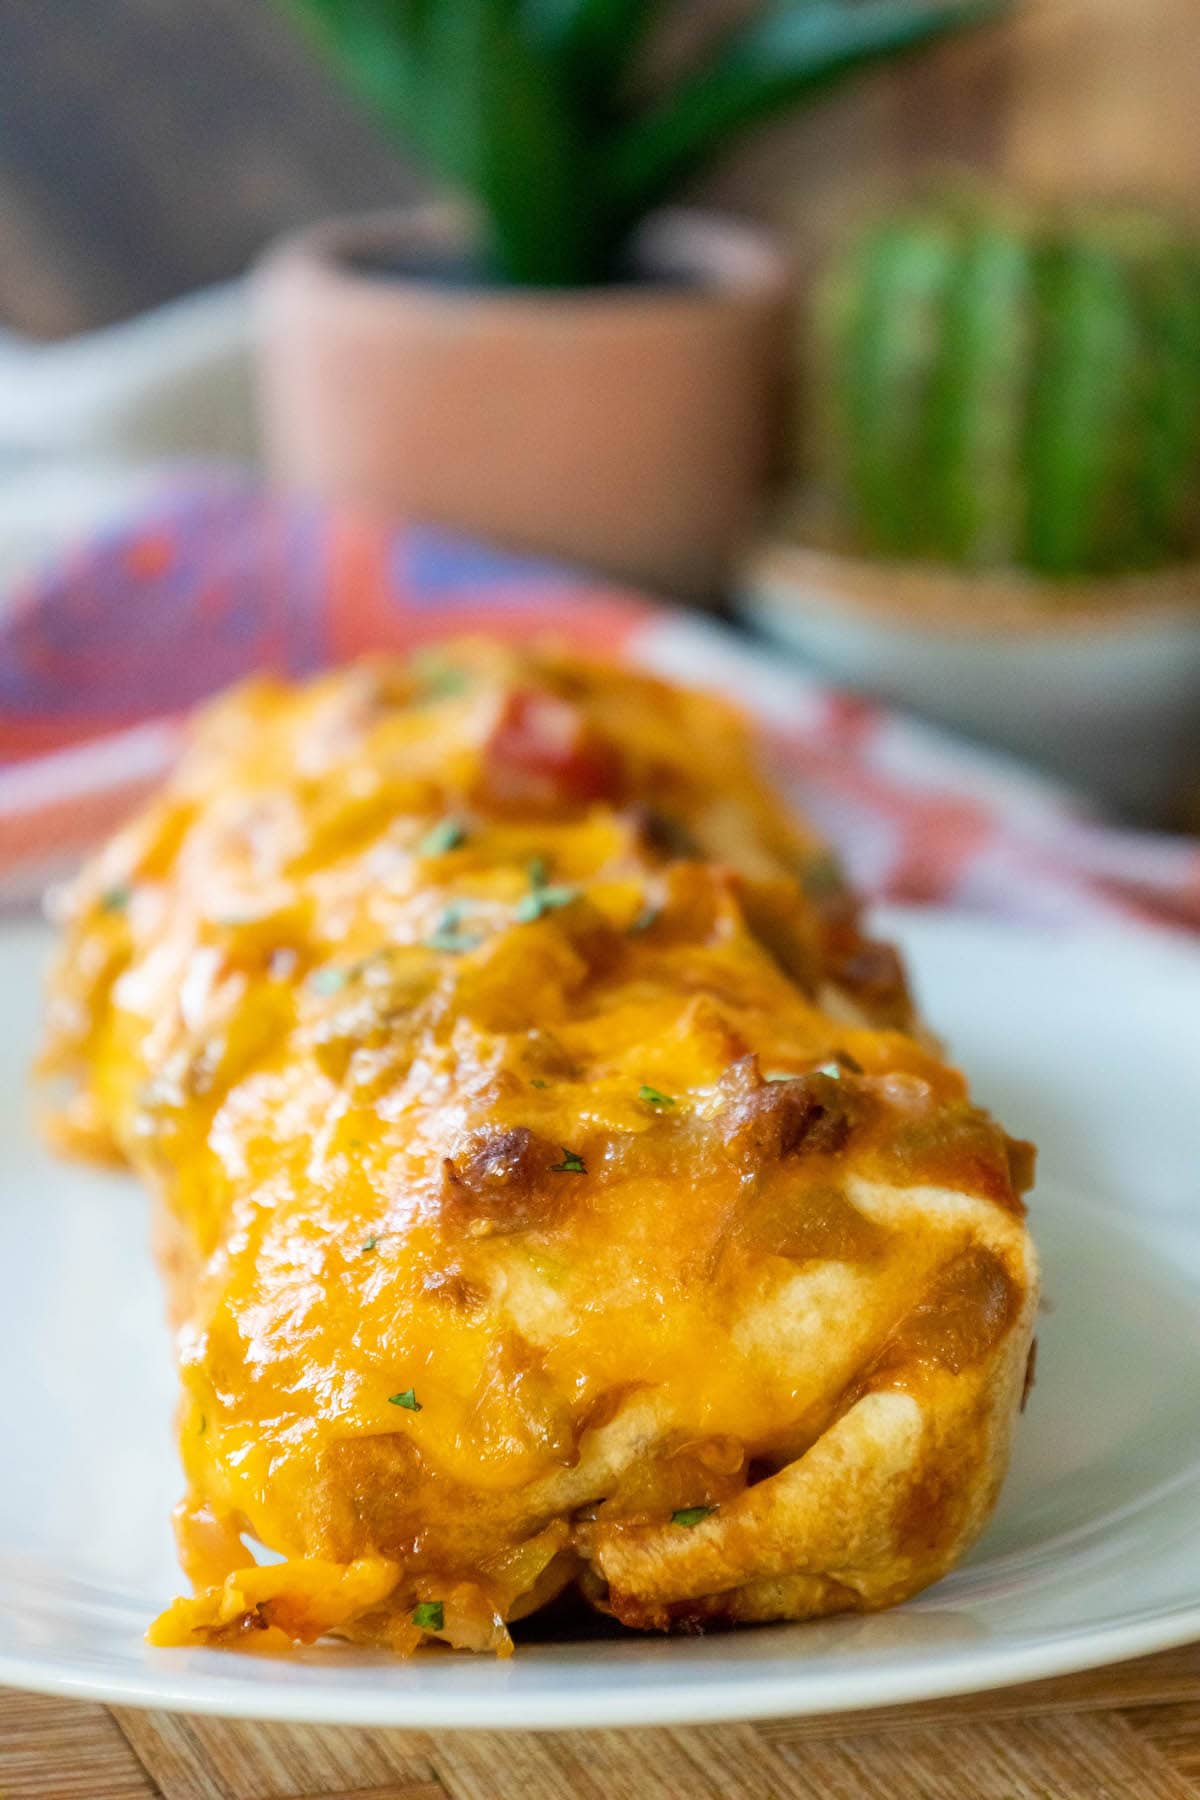 baked breakfast burrito in a red dish smothered in green chile sauce and melted cheese